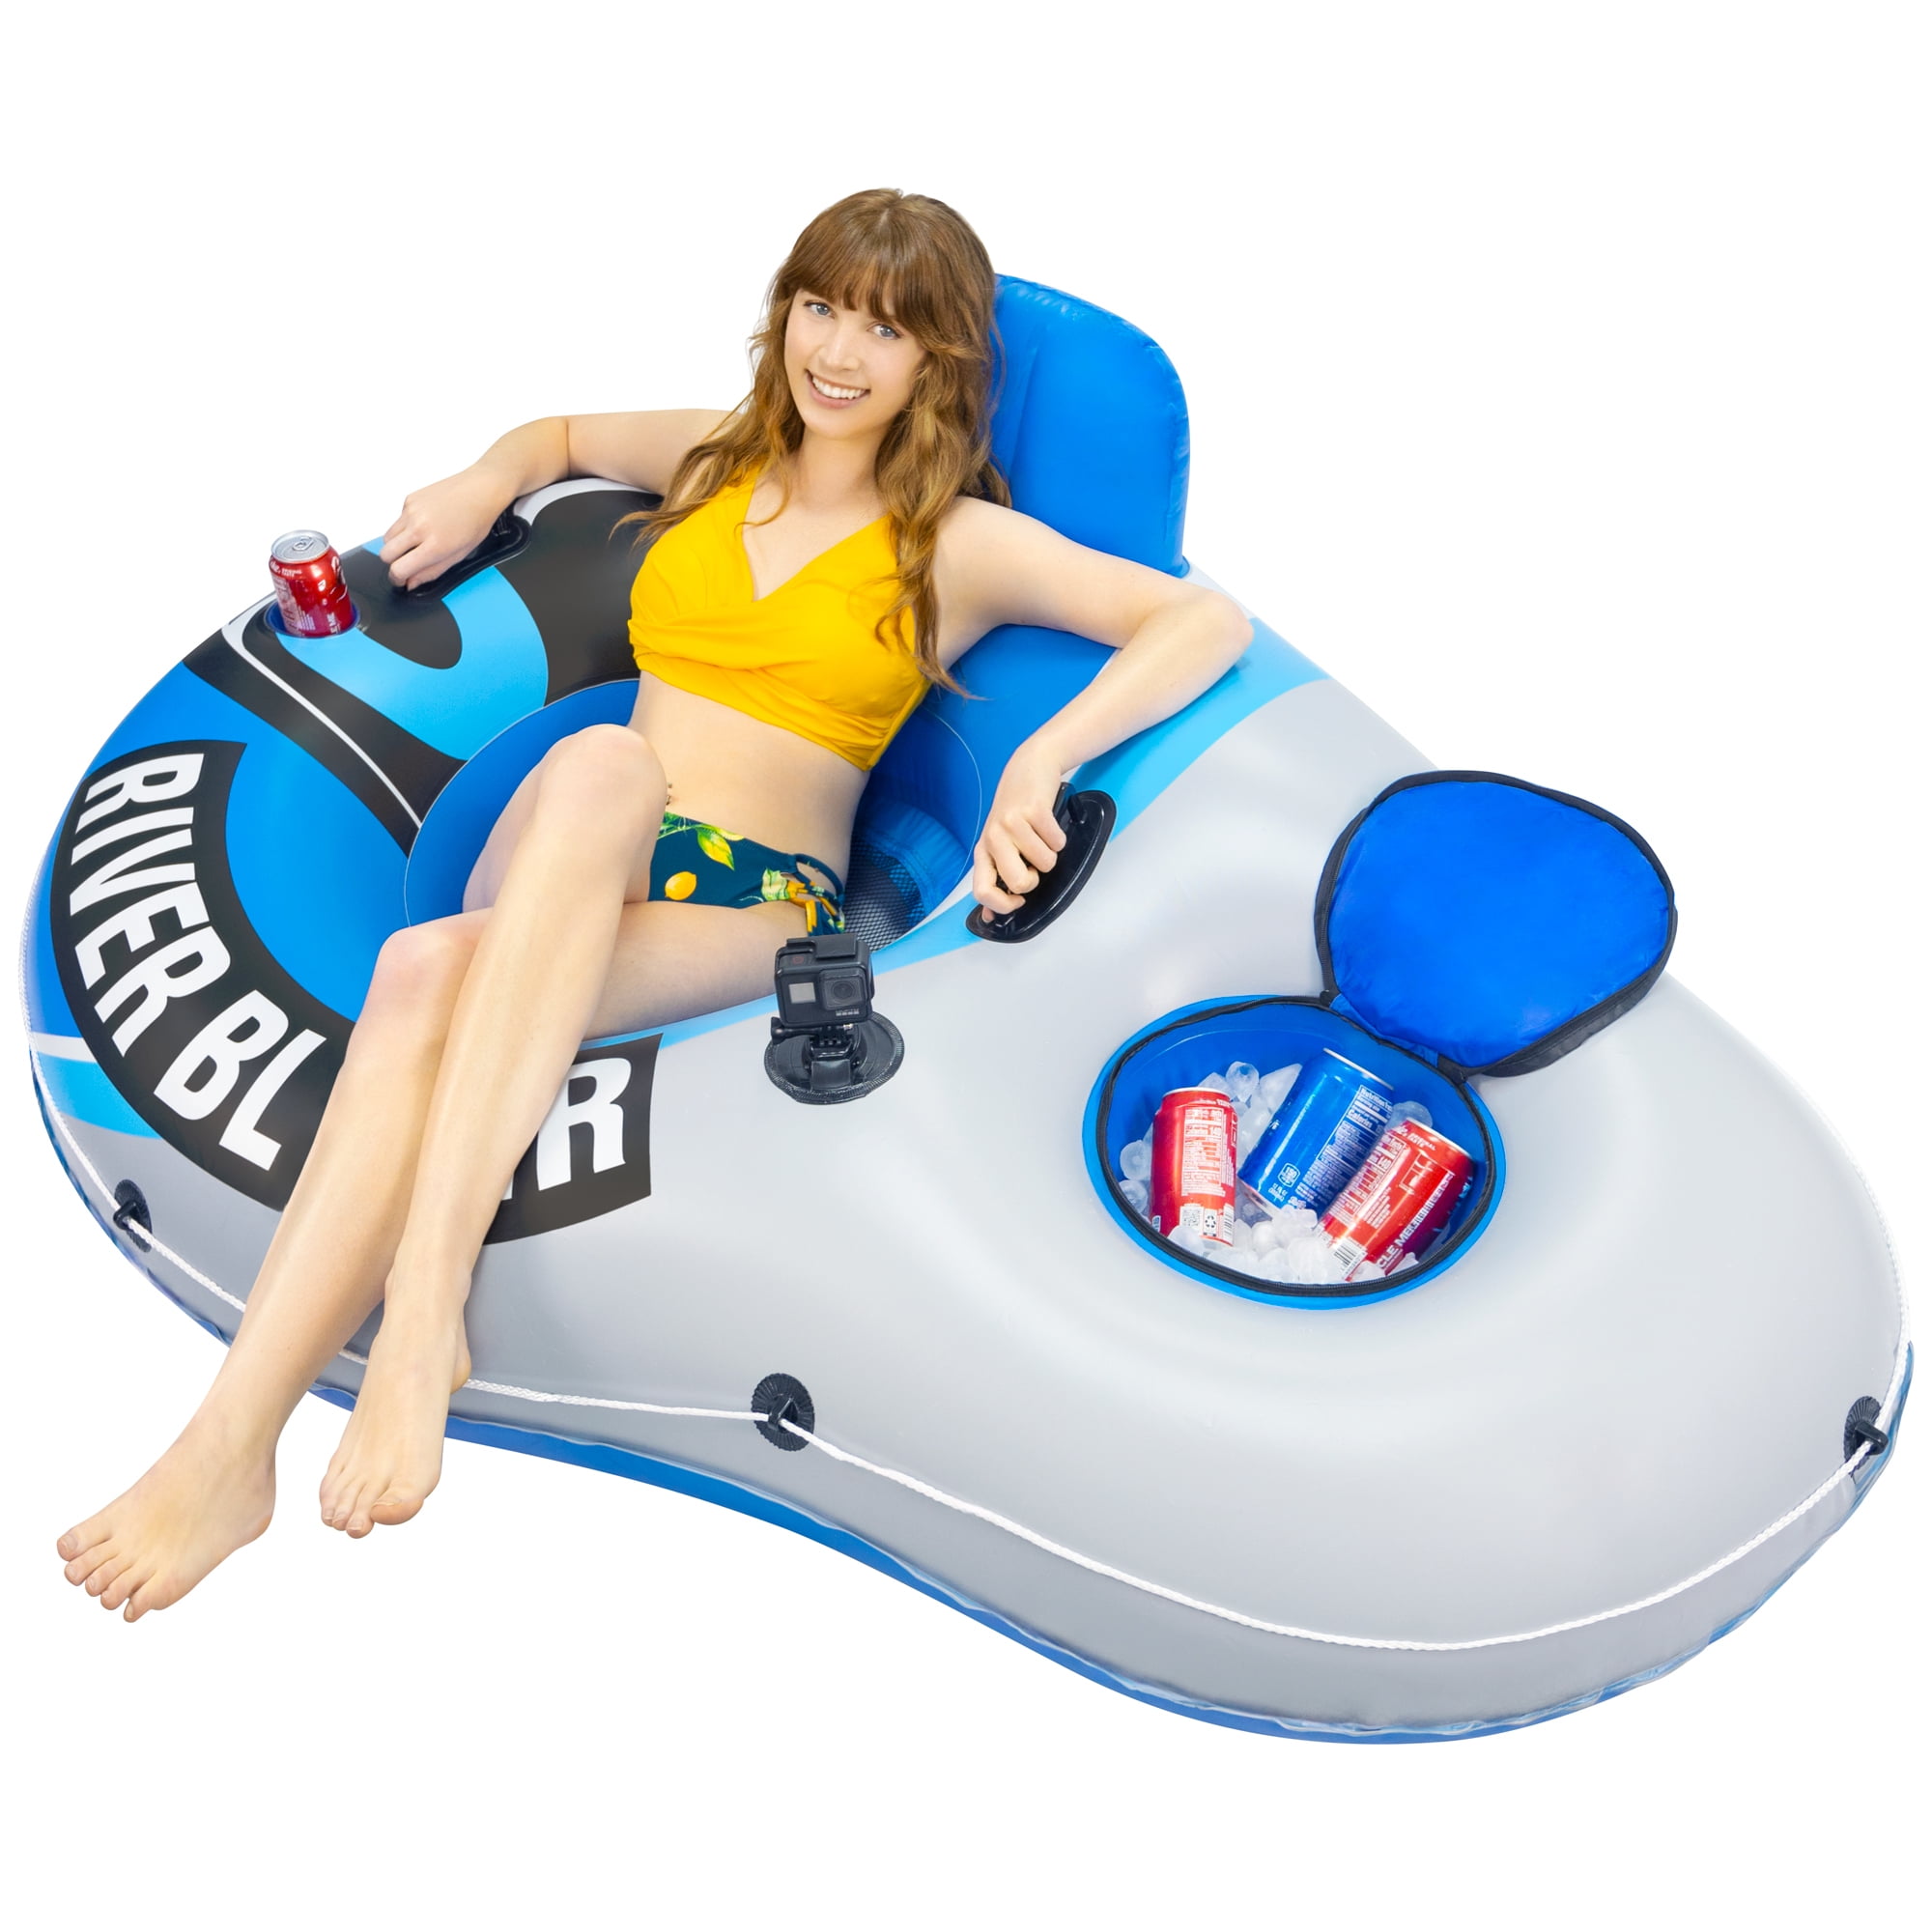 Sunlite Sports River Raft with Cooler and Storage Compartment